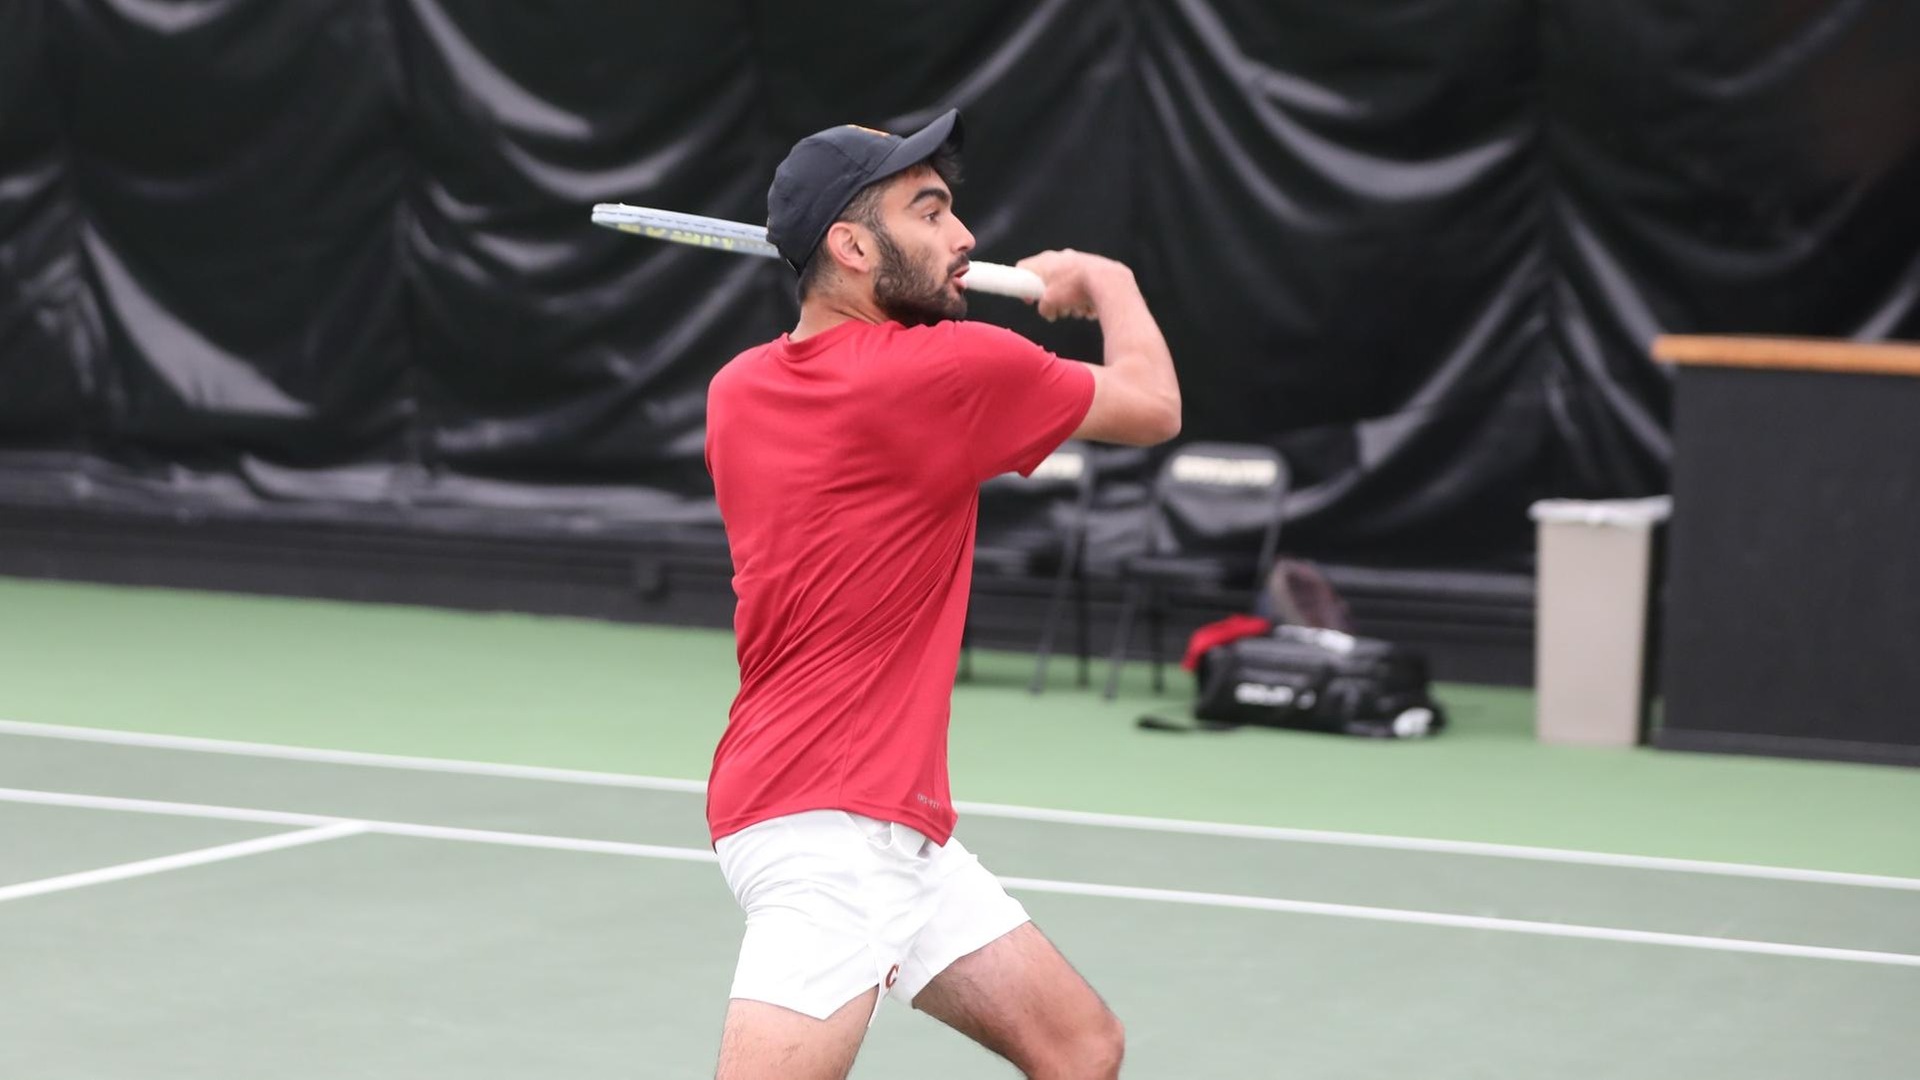 Nathan Arimilli was part of an 8-6 win at No. 3 doubles